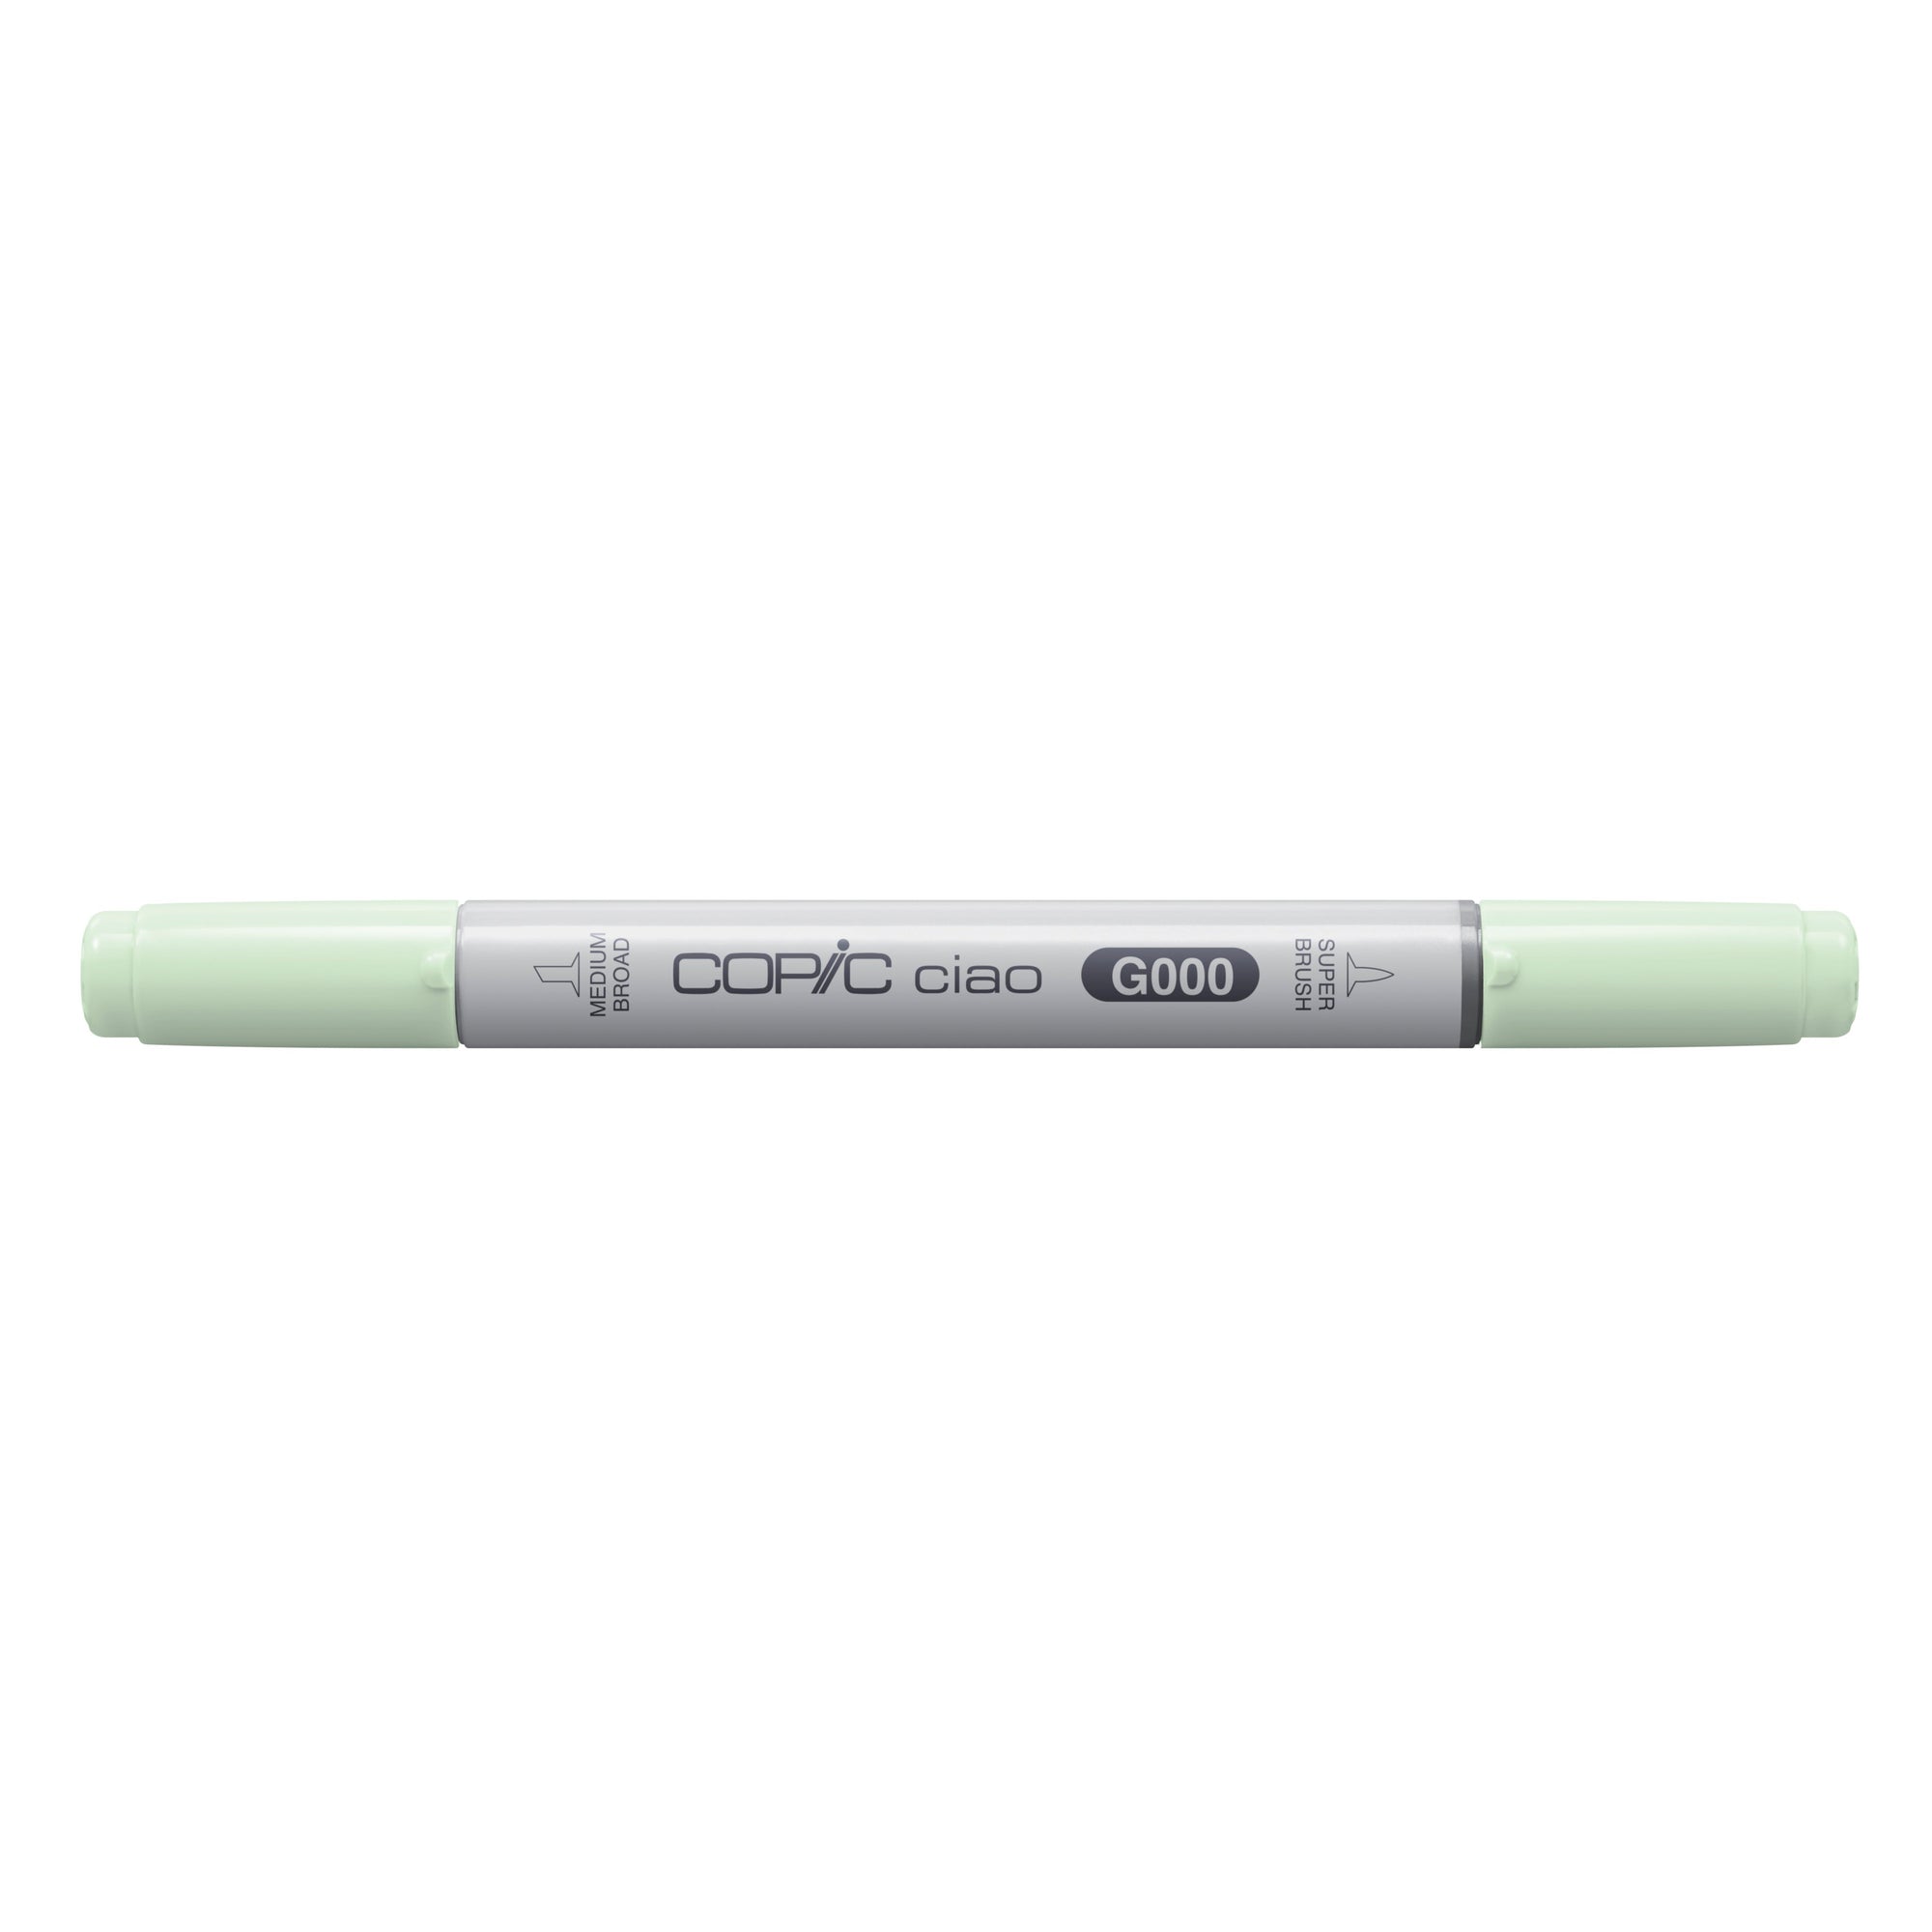 Copic - Ciao Marker - Pale Green - G000-ScrapbookPal